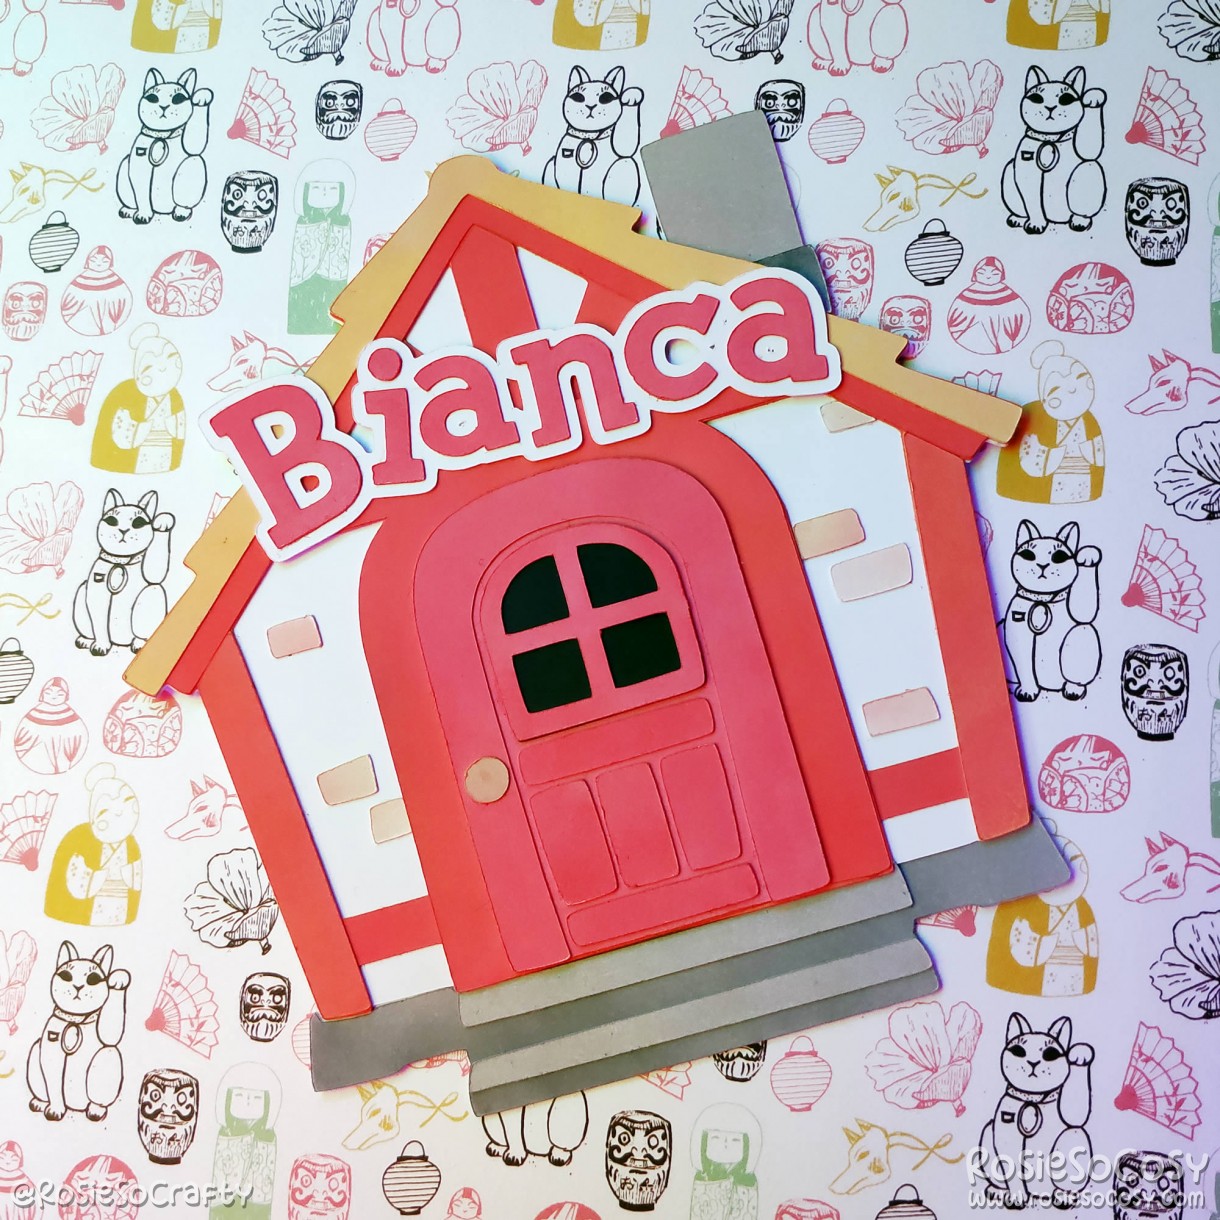 Animal Crossing: New Horizons house paper craft for Bianca